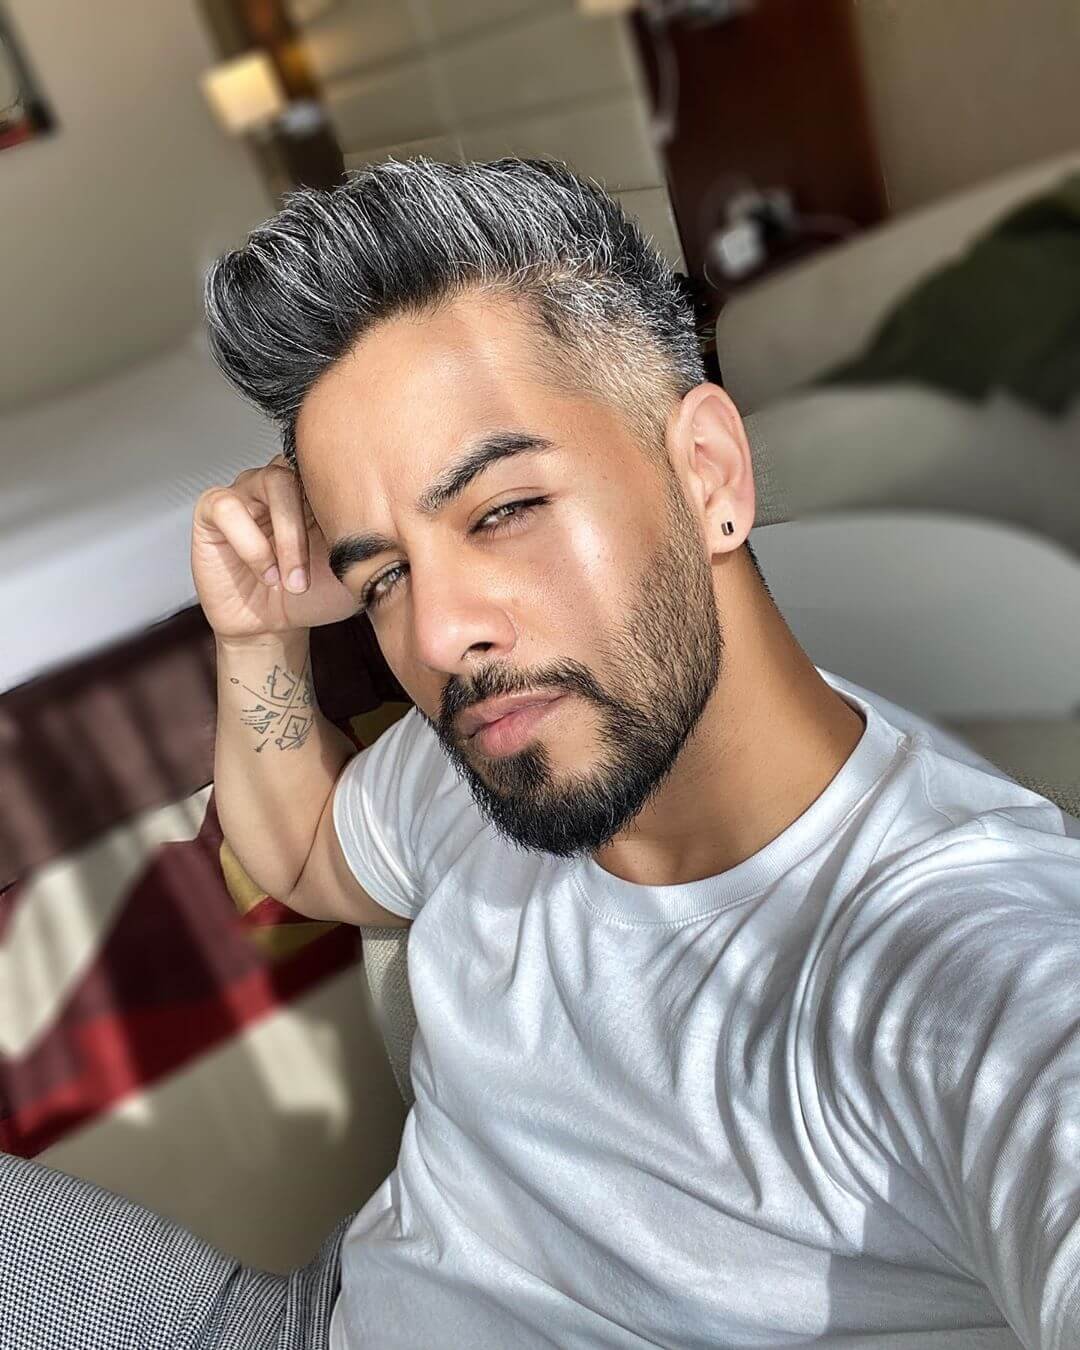 Let's Finish Men's Hair to a Higher Level With Ash Gray